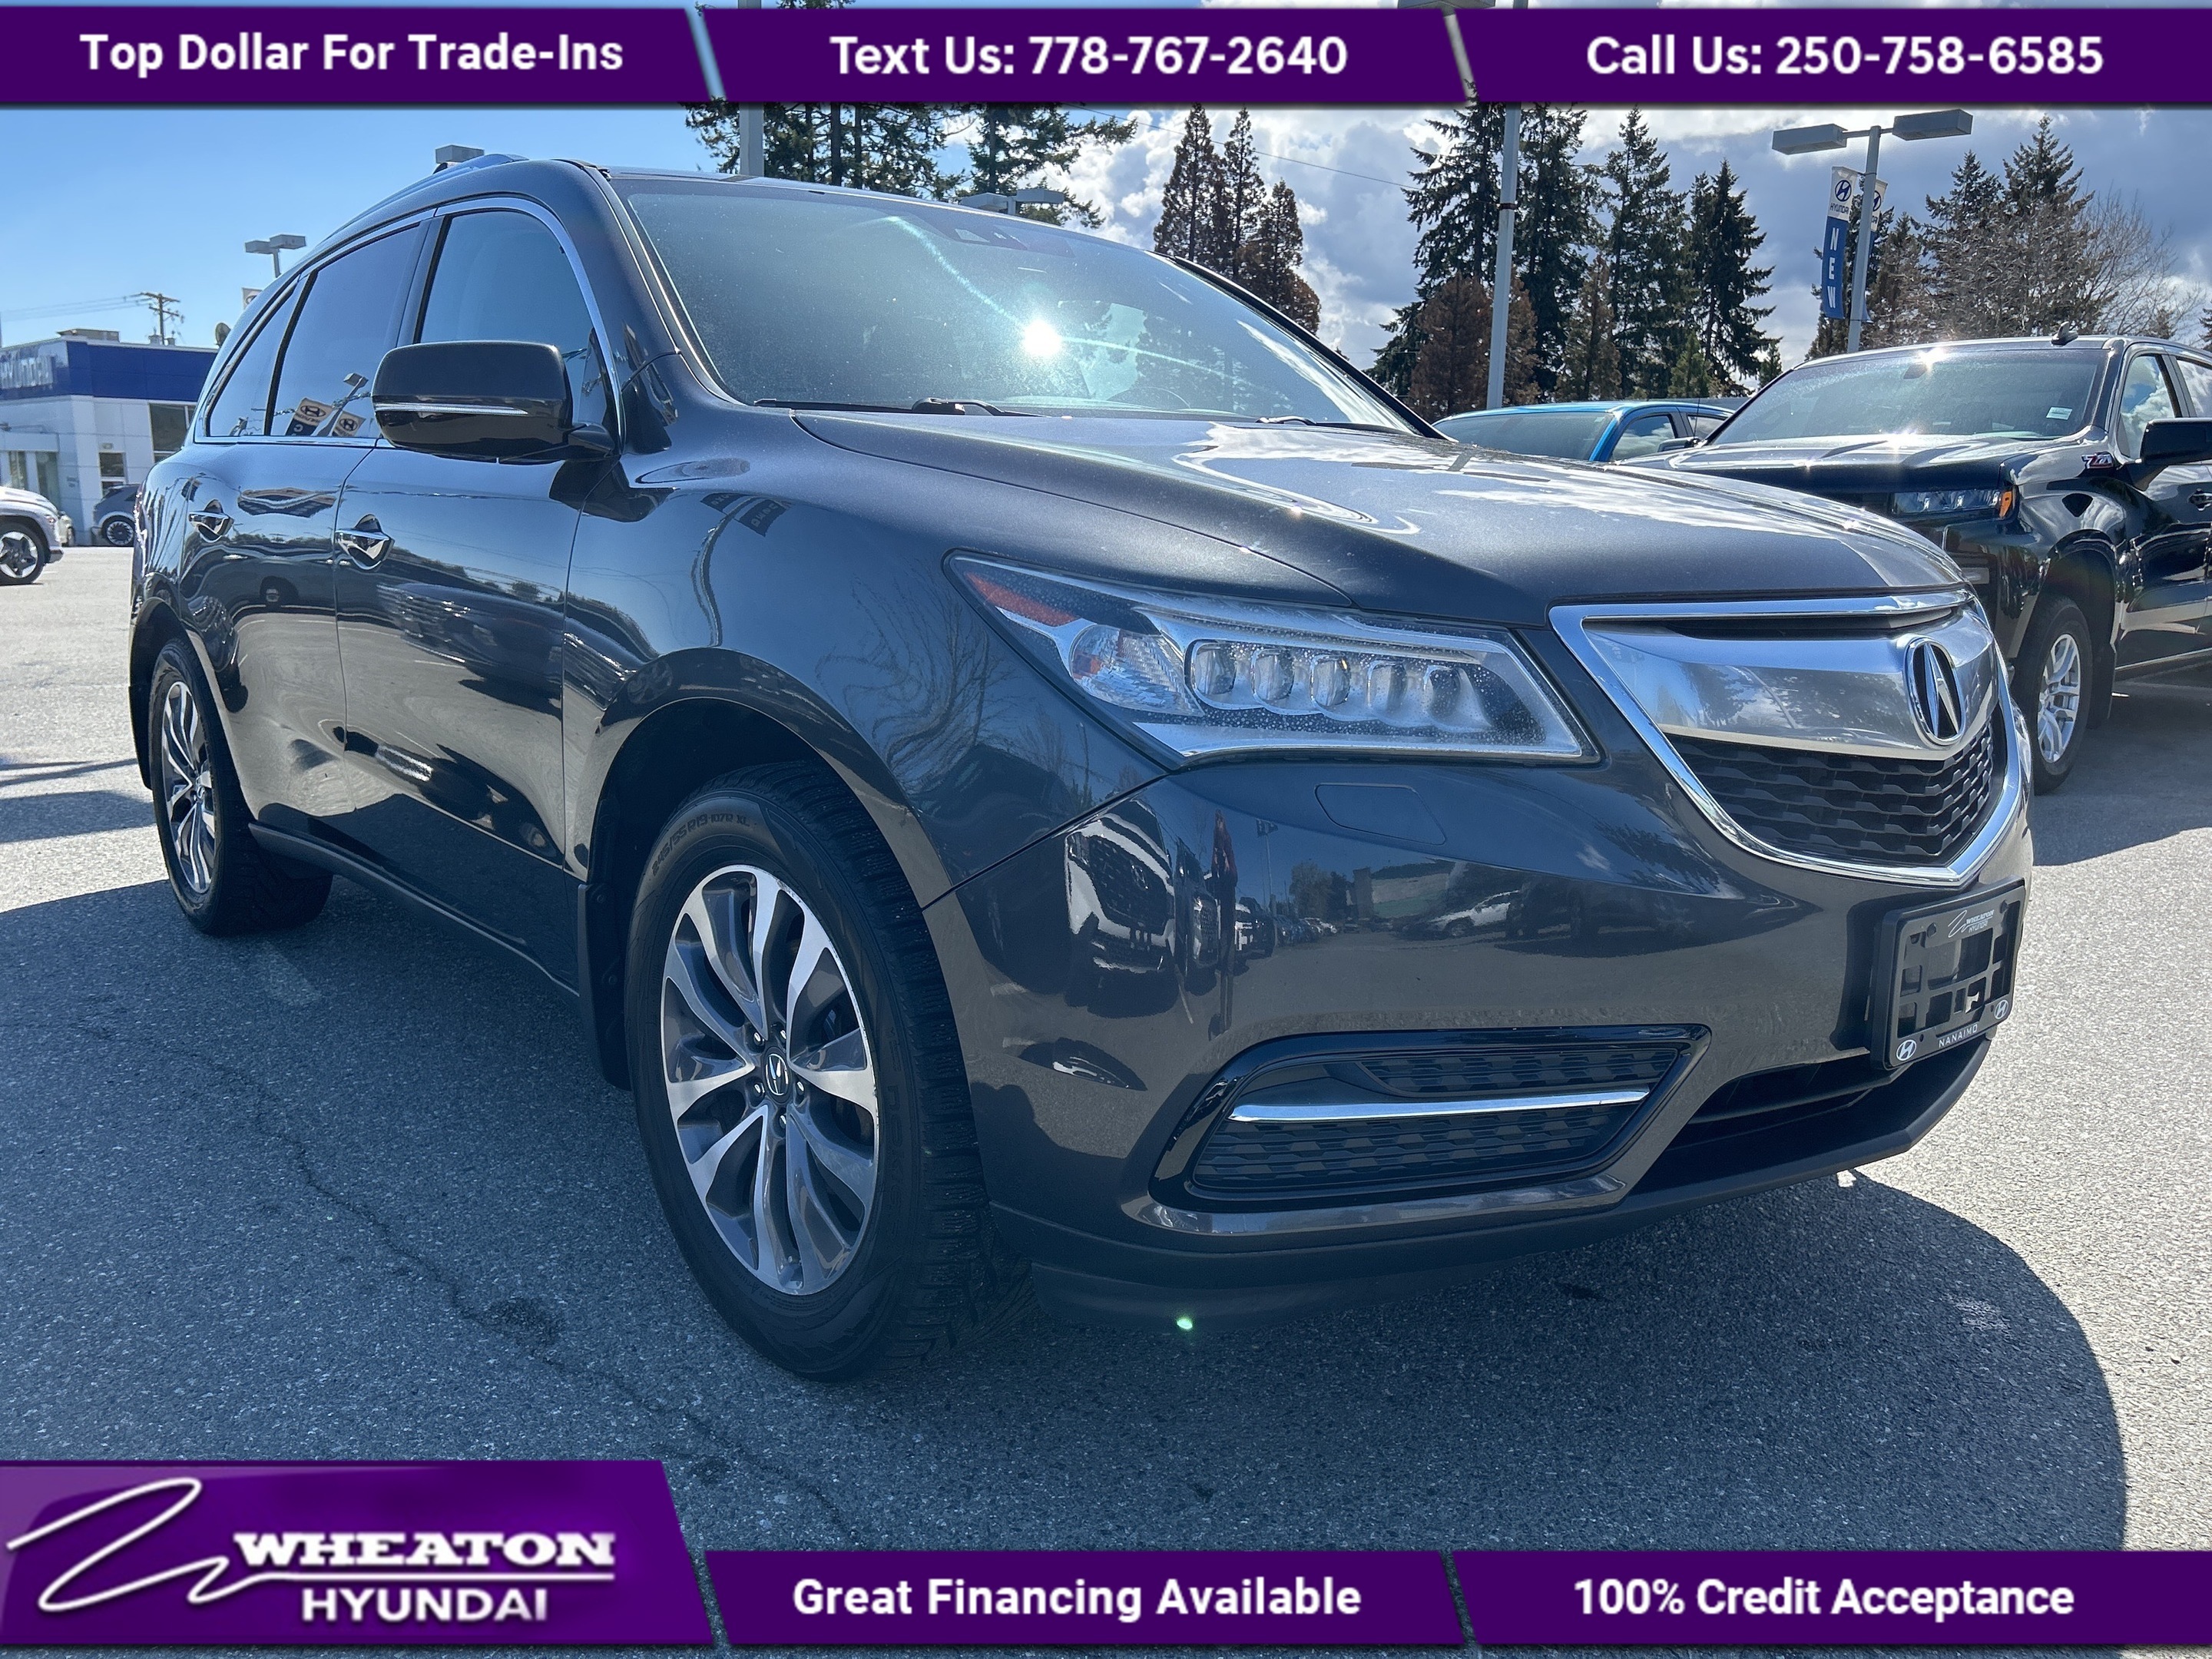 2015 Acura MDX Nav Pkg, No Accidents, One Owner, Island Car, Trad